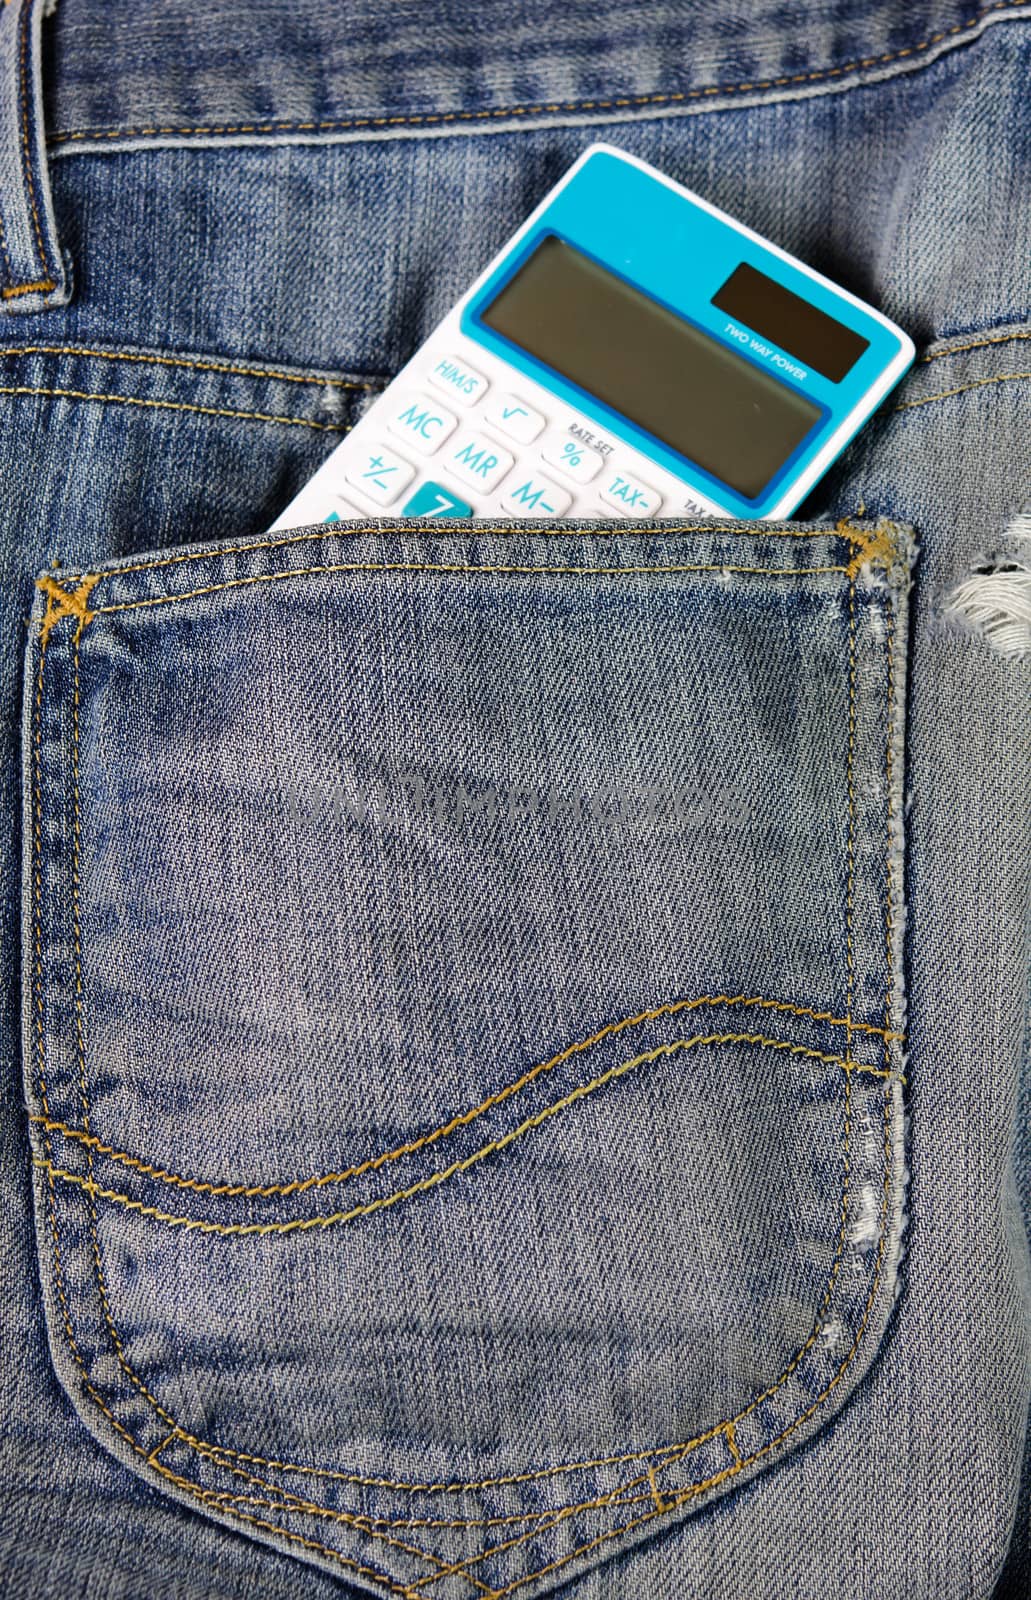  jeans pocket calculator. by aoo3771